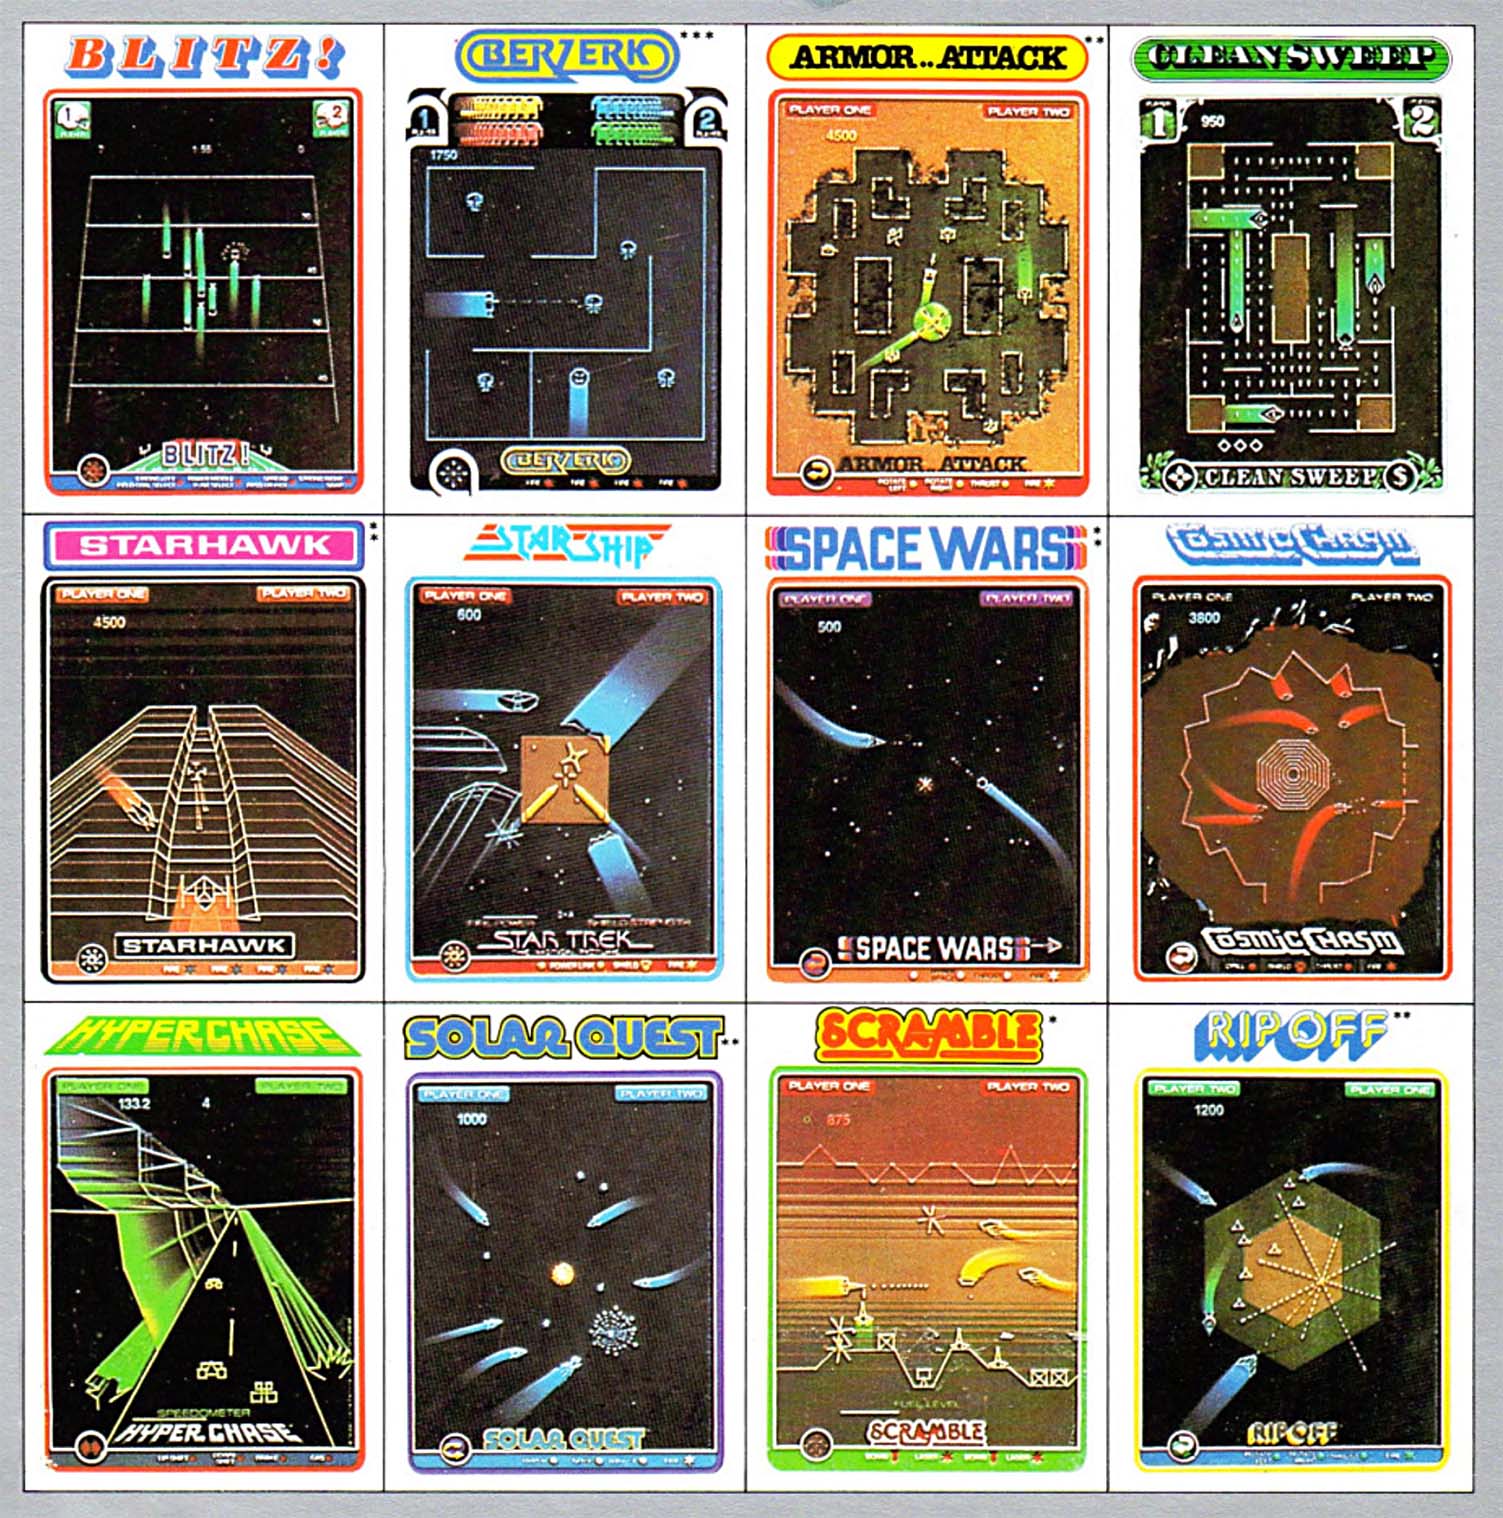 Video games for the Vectrex video game console